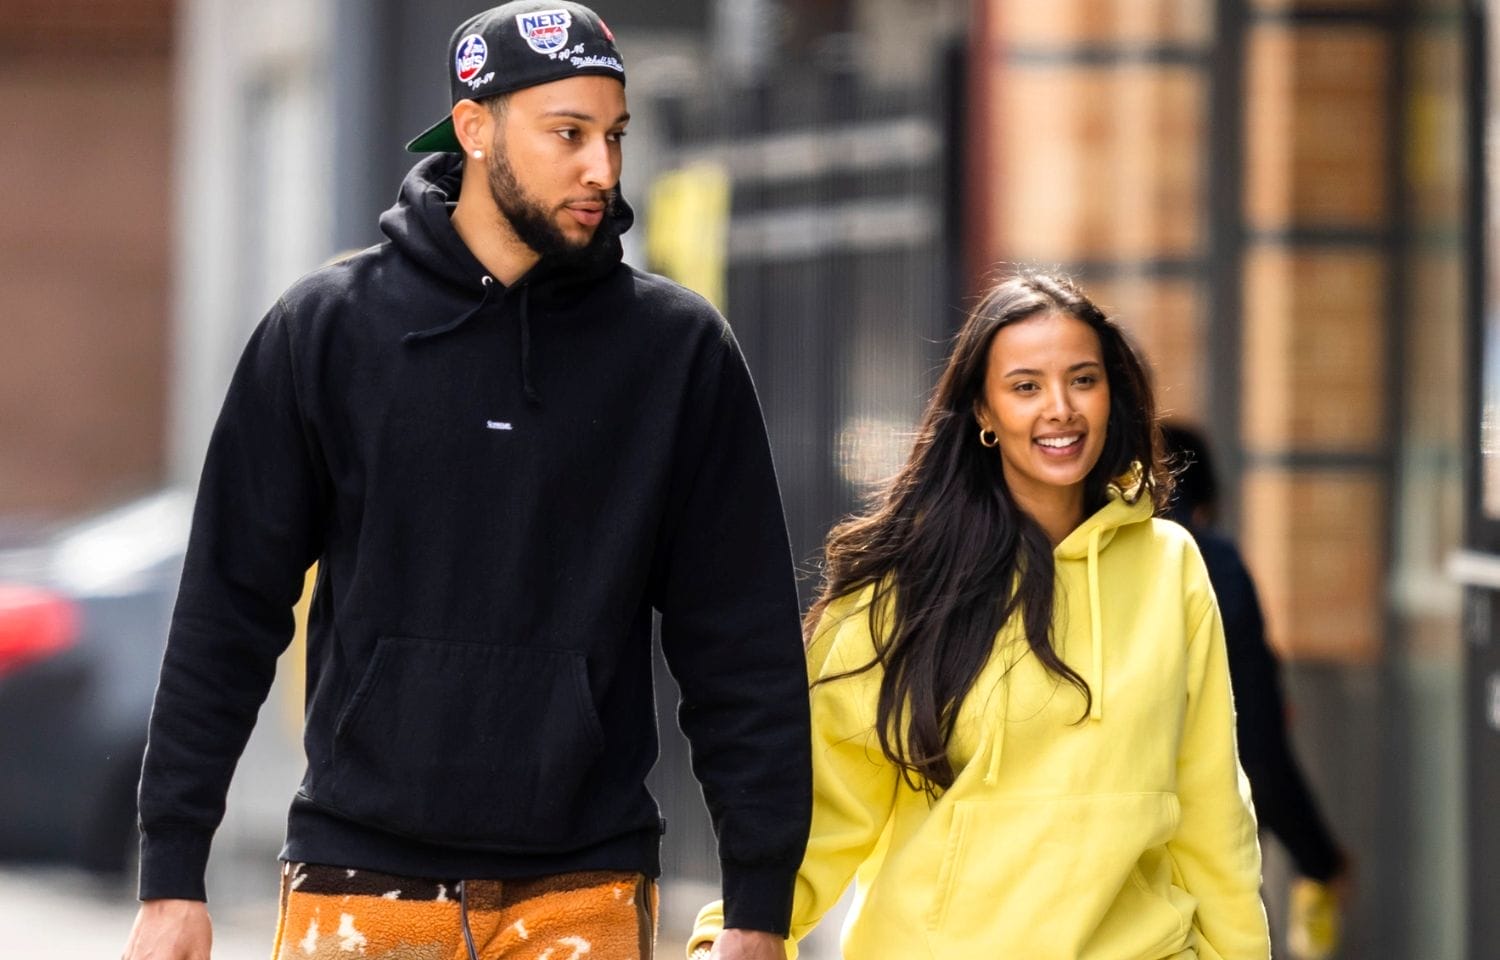 Who is Ben Simmons Dating?